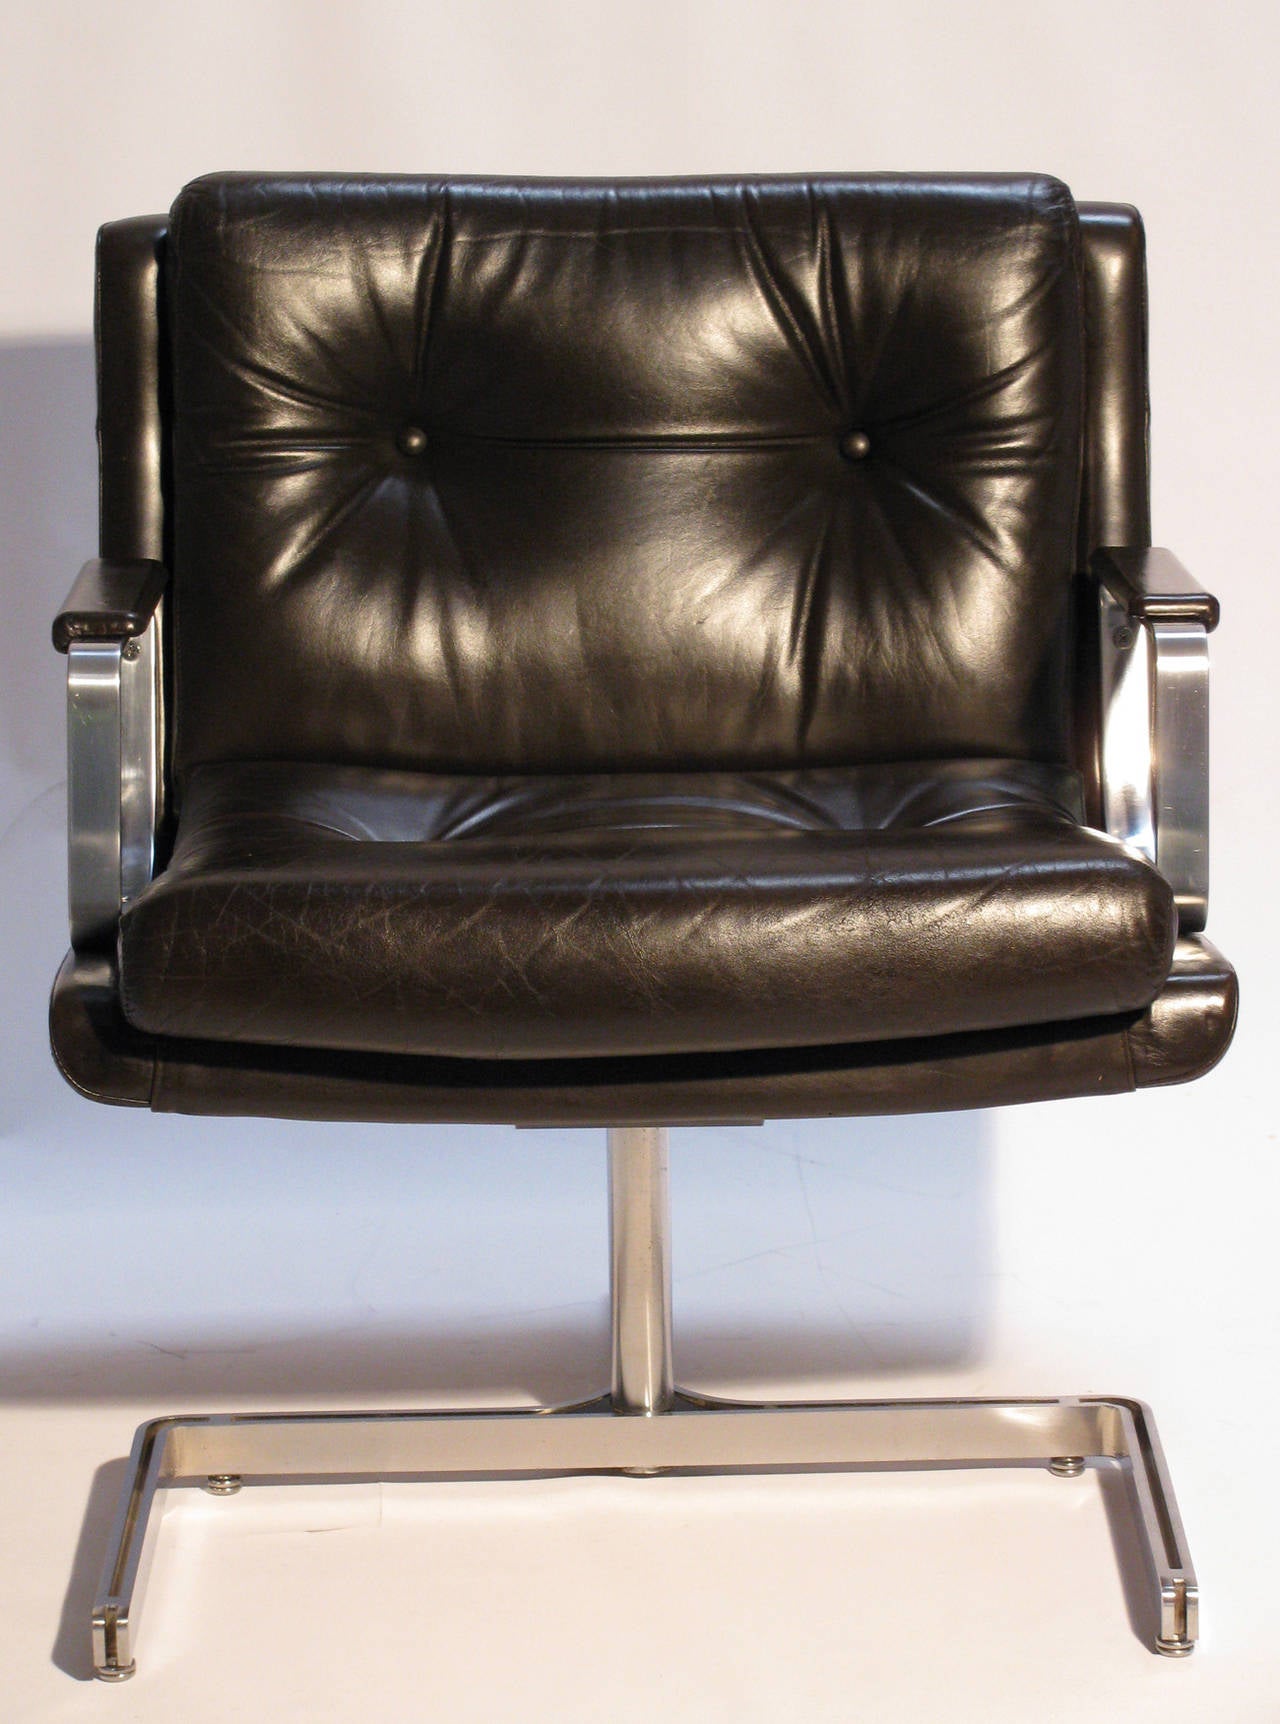 A modernist pair of French lounge chairs by Raphael Raffel, better known as Raphael, (1912-2000). Sumptuous espresso leather on satin-finished chrome wishbone base, with canted arms and leather pads.